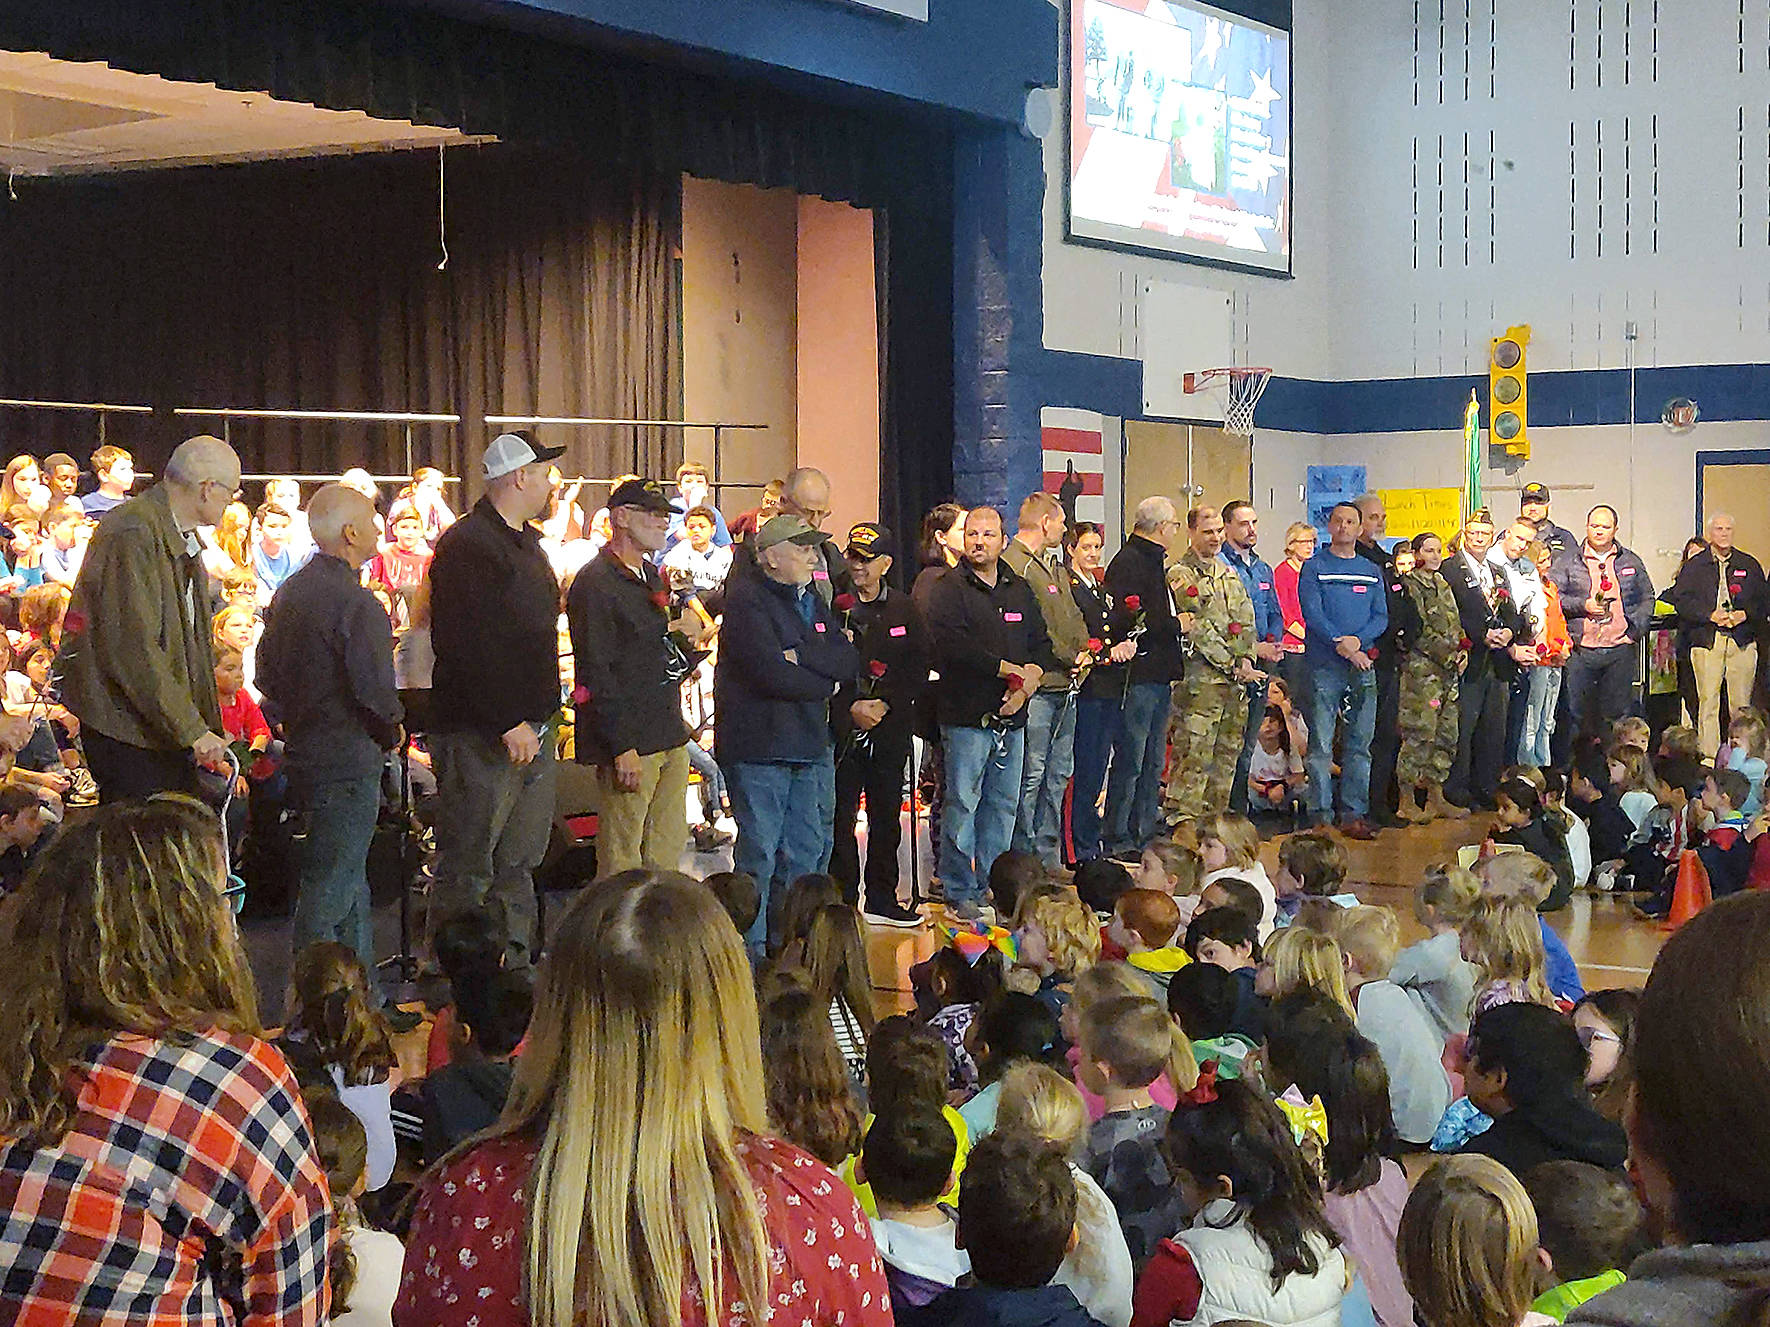 Veterans in the crowd were asked to stand near the stage during a special Veterans Day Assembly. Veterans introduced themselves, said where they served and for what military branch, and were given roses as a “thank you” for their service by the Glacier Park Elementary School fifth grade class. Photo by Danielle Chastaine.                                 Veterans in the crowd were asked to stand near the stage during a special Veterans Day Assembly. Veterans introduced themselves, said where they served and for what military branch, and were given roses as a “thank you” for their service by the Glacier Park Elementary School fifth grade class. Photo by Danielle Chastaine.